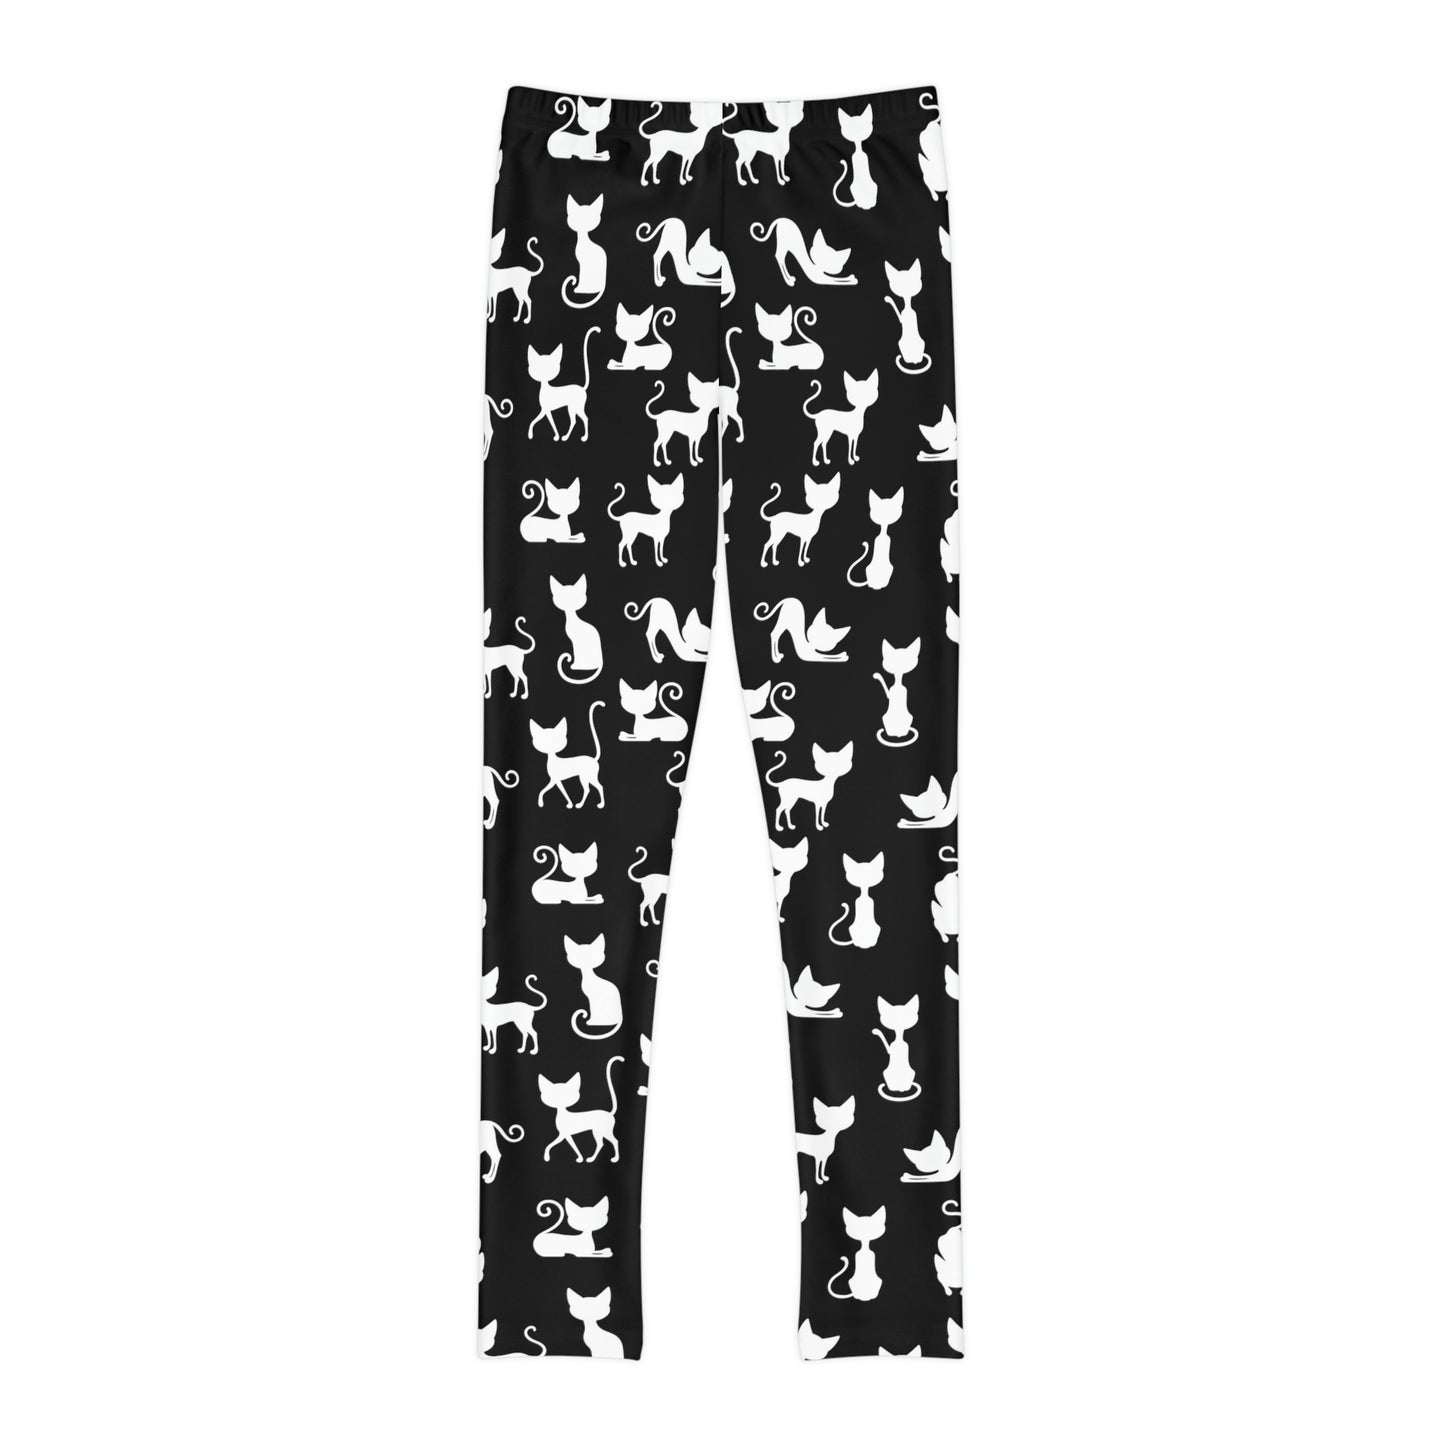 Cat Youth Leggings,  One of a Kind Gift - Unique Workout Activewear tights for  kids Fitness , Daughter, Niece  Christmas Gift